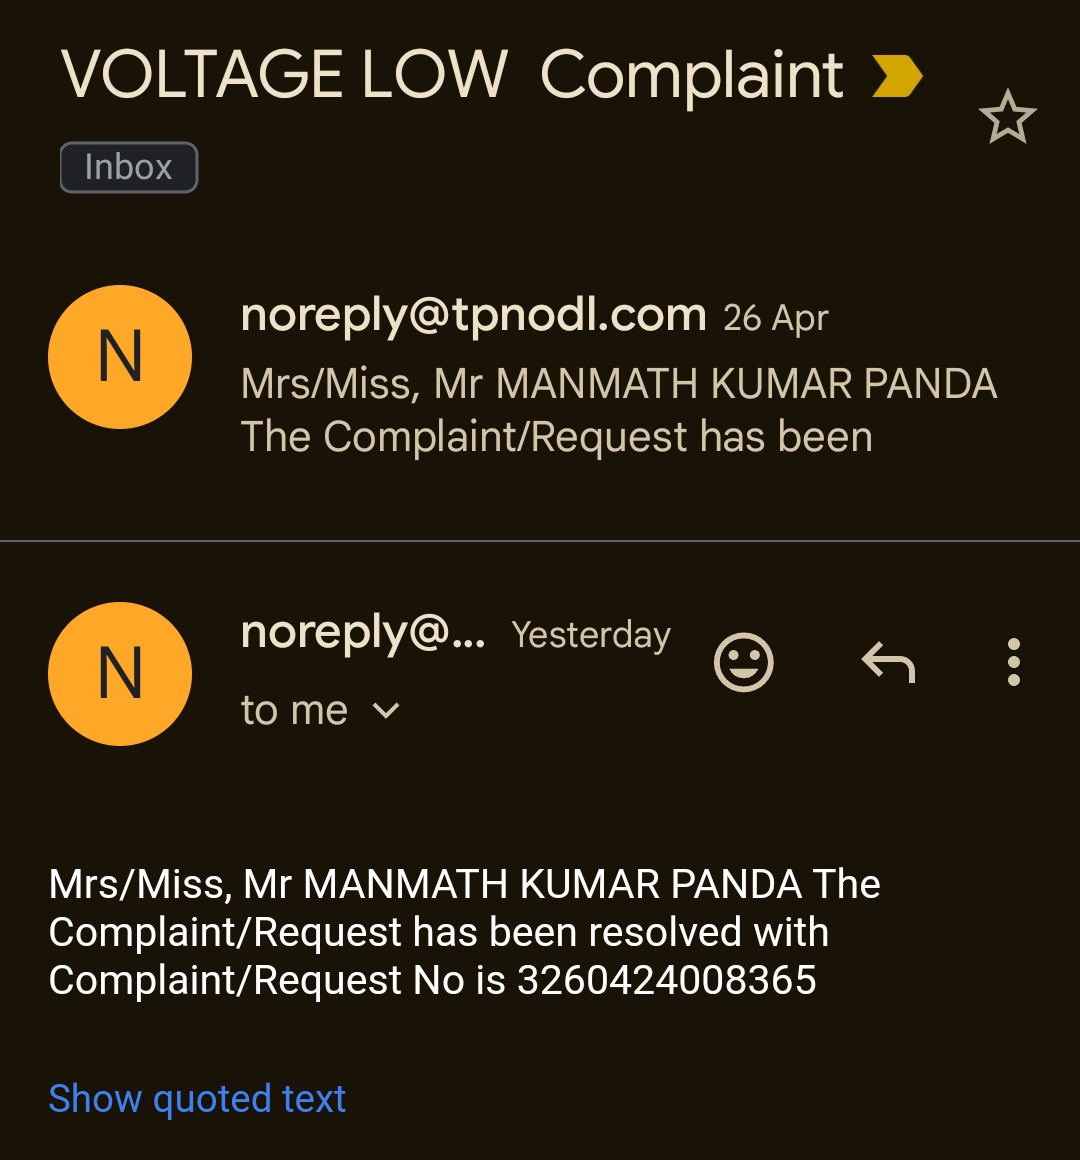 Issue has not been resolved, but sent your resolved message? without taking feedback.@tpnodl_balasore

Dear @PradeepJenaIAS sir please look into this matter..